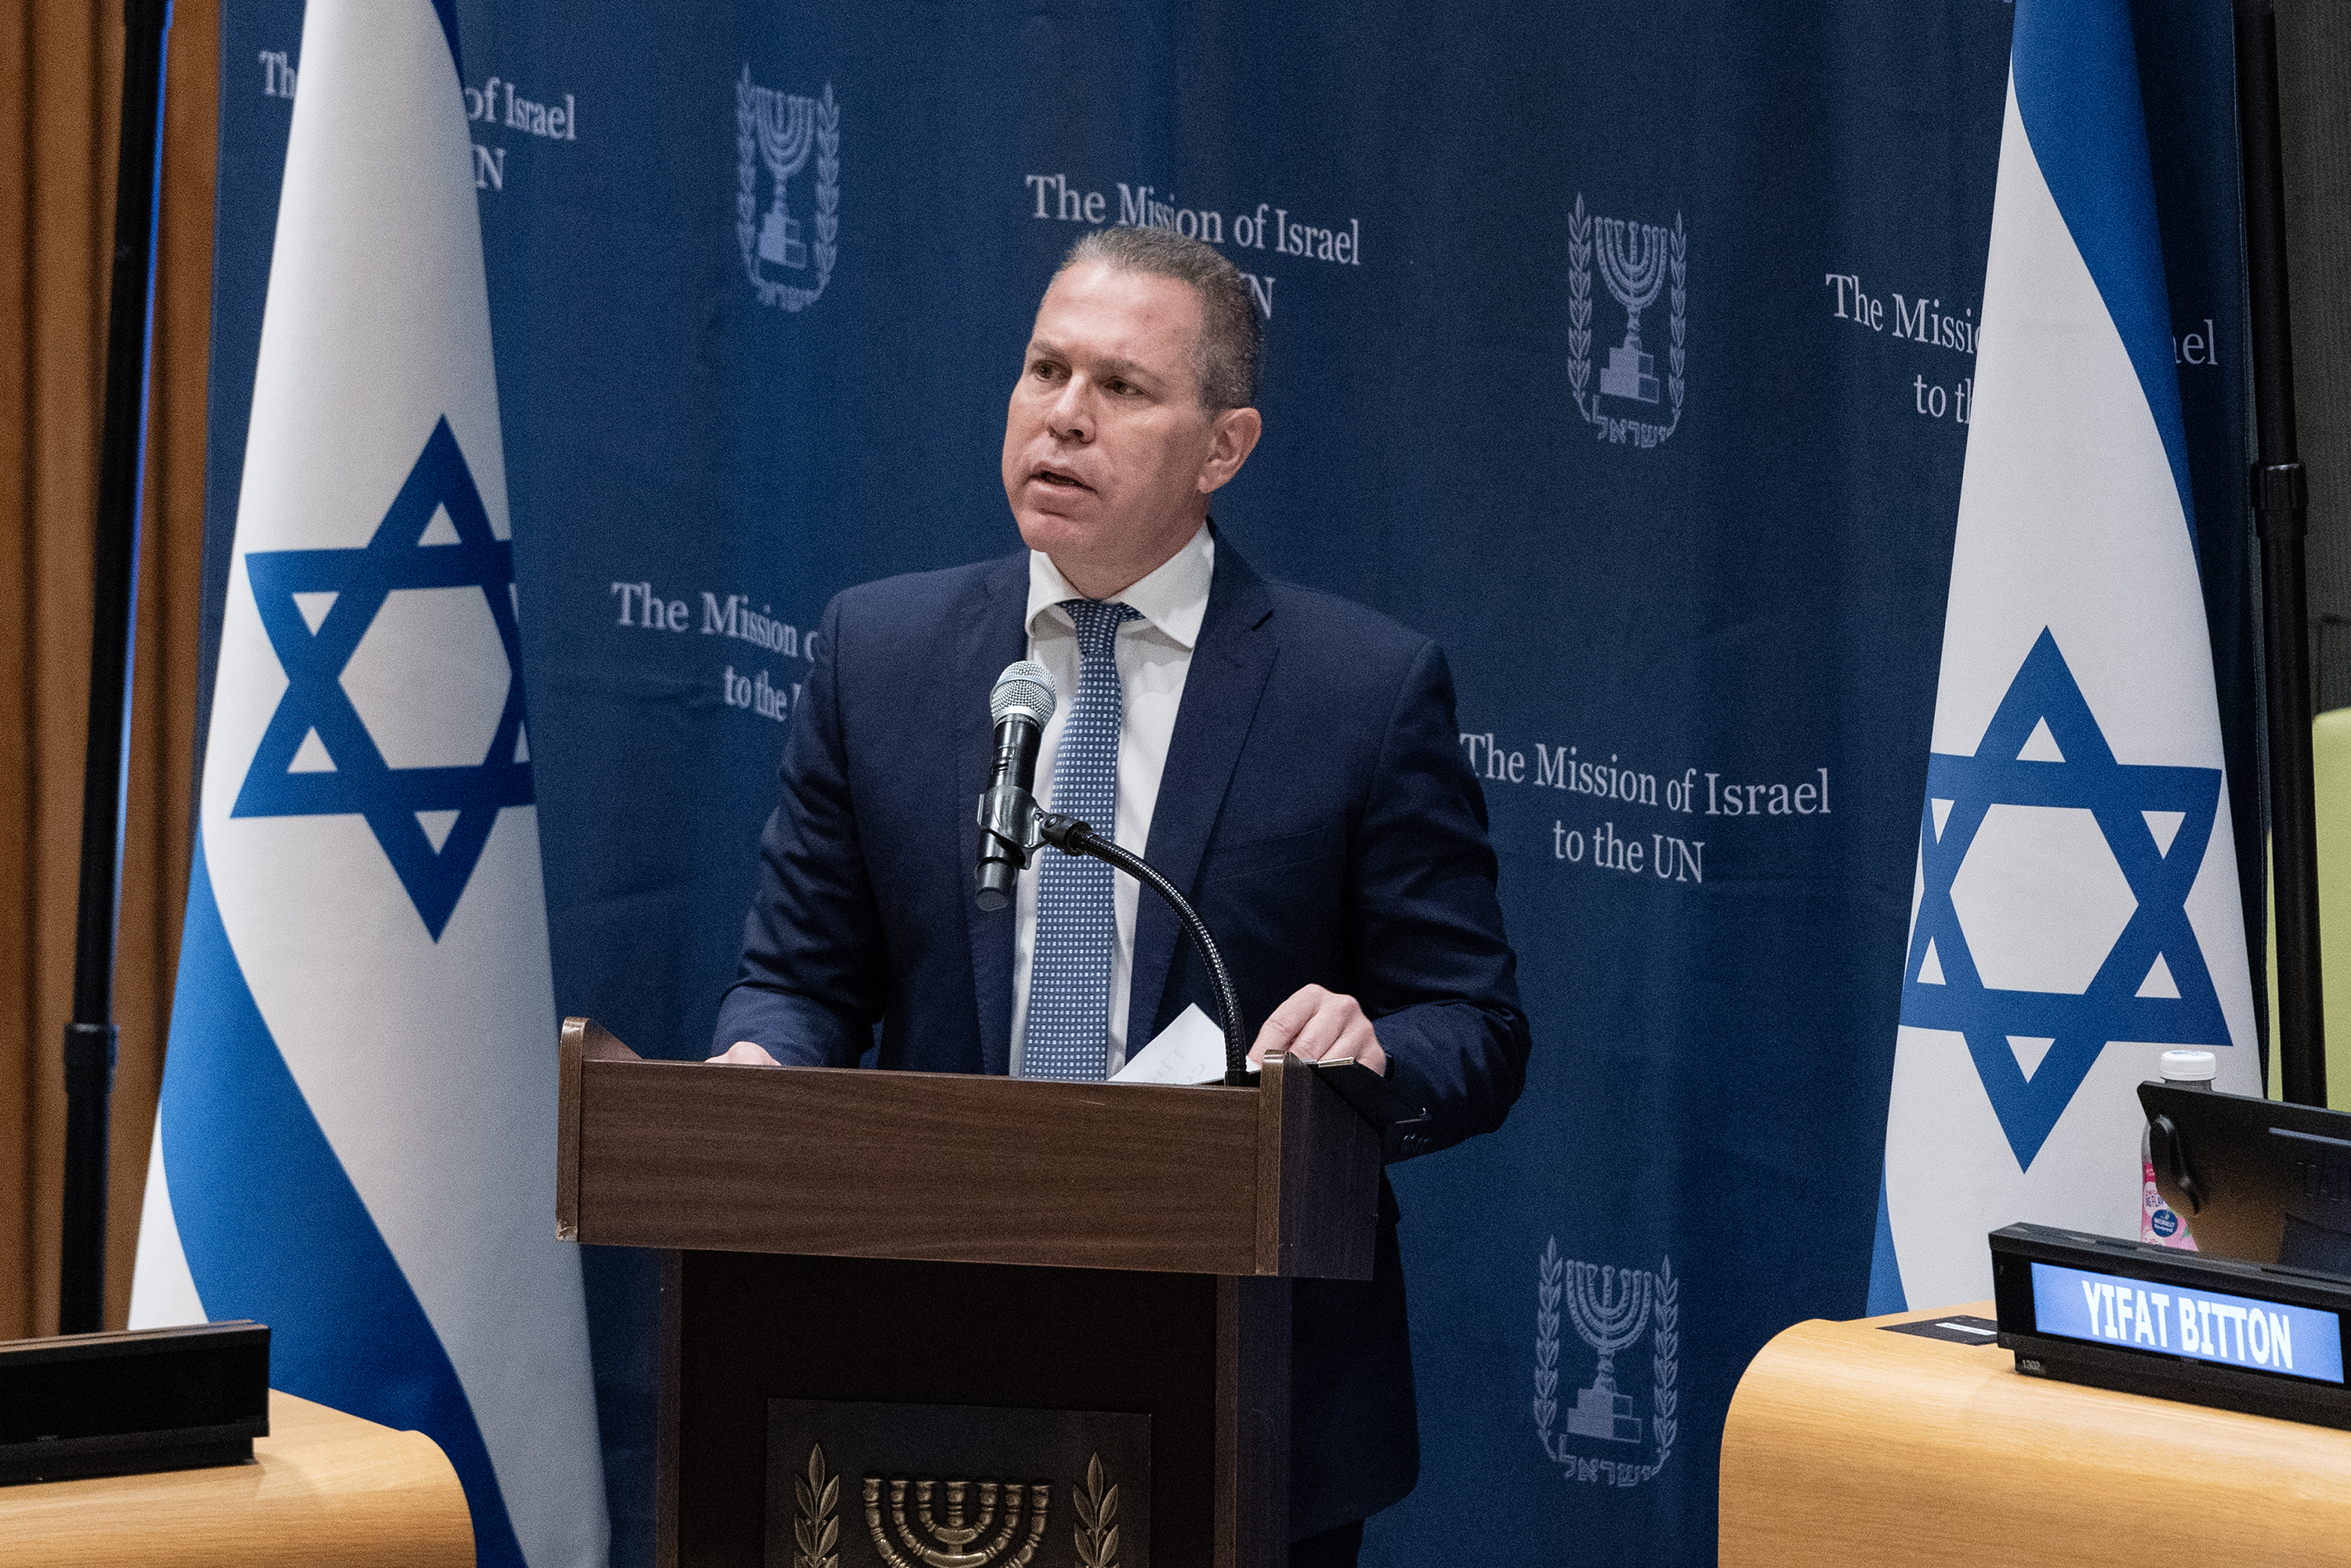 Gilad Erdan, Israel's ambassador to the United Nations, speaks during special event to address sexual violence during Hamas terror attack on October 7 held at UN Headquarters in New York on December 4.